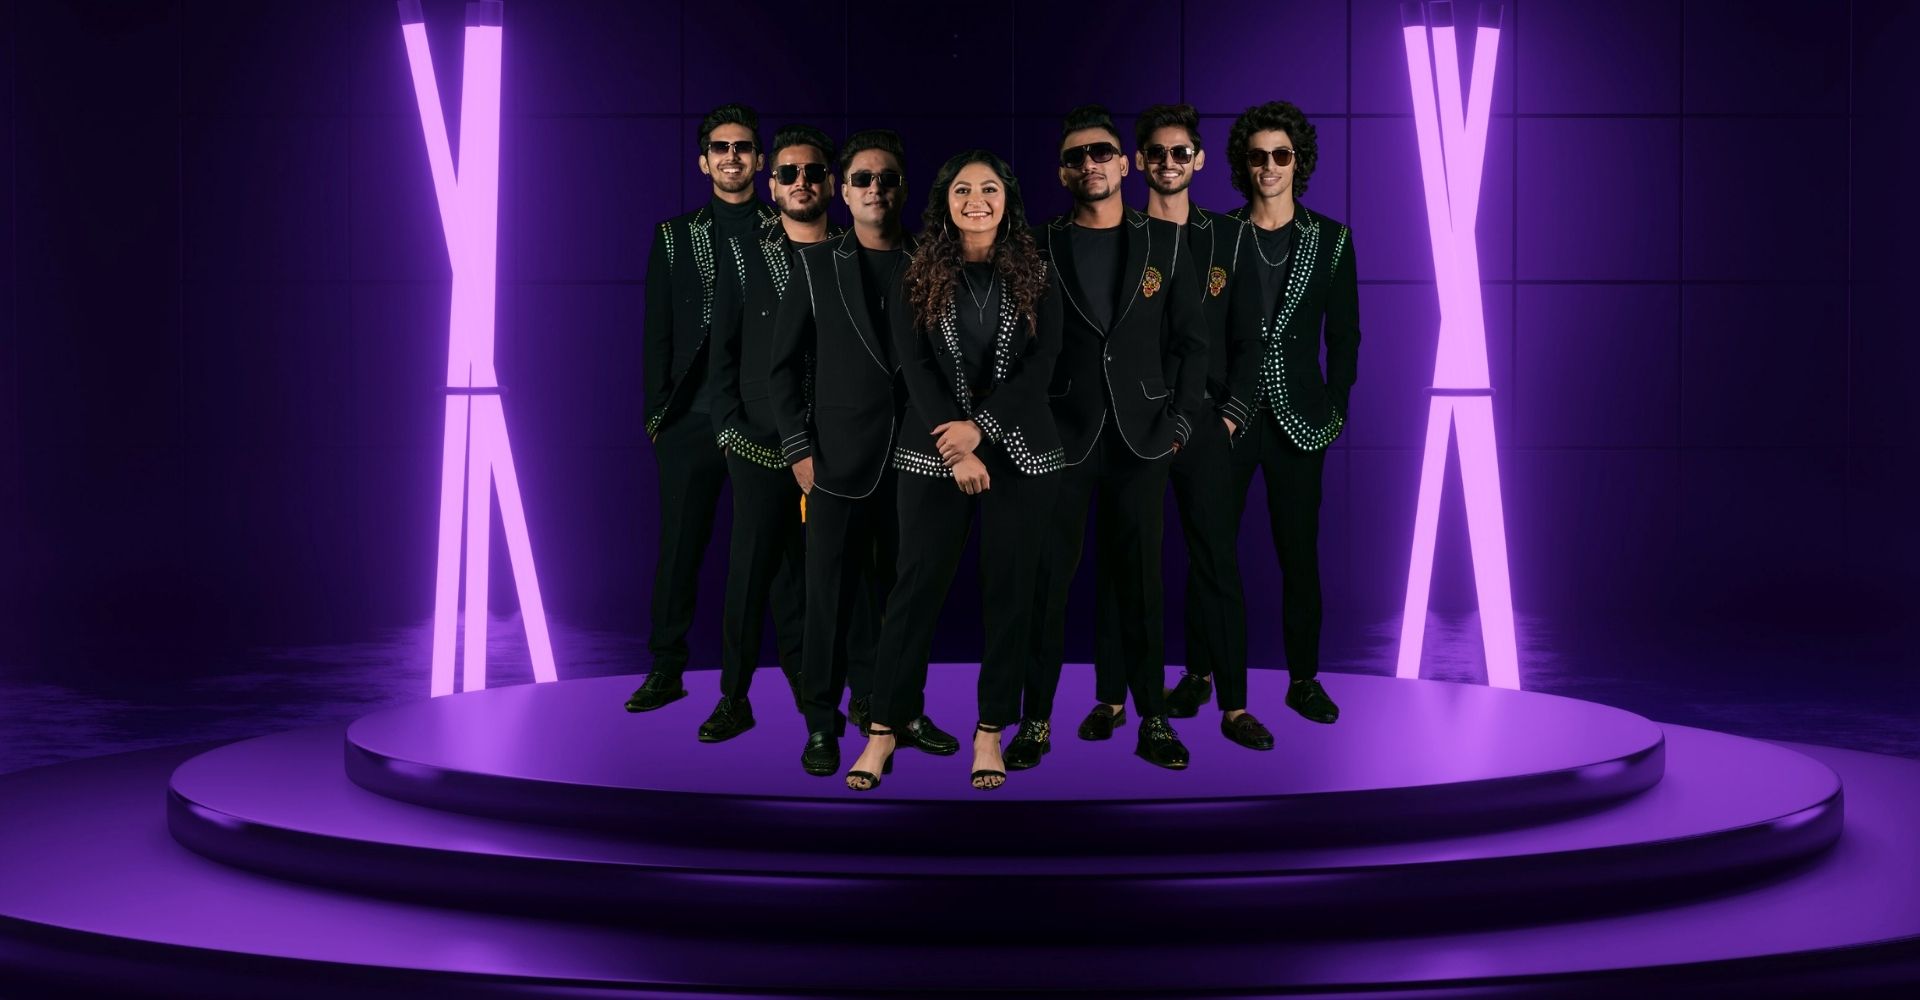 dj based band in india